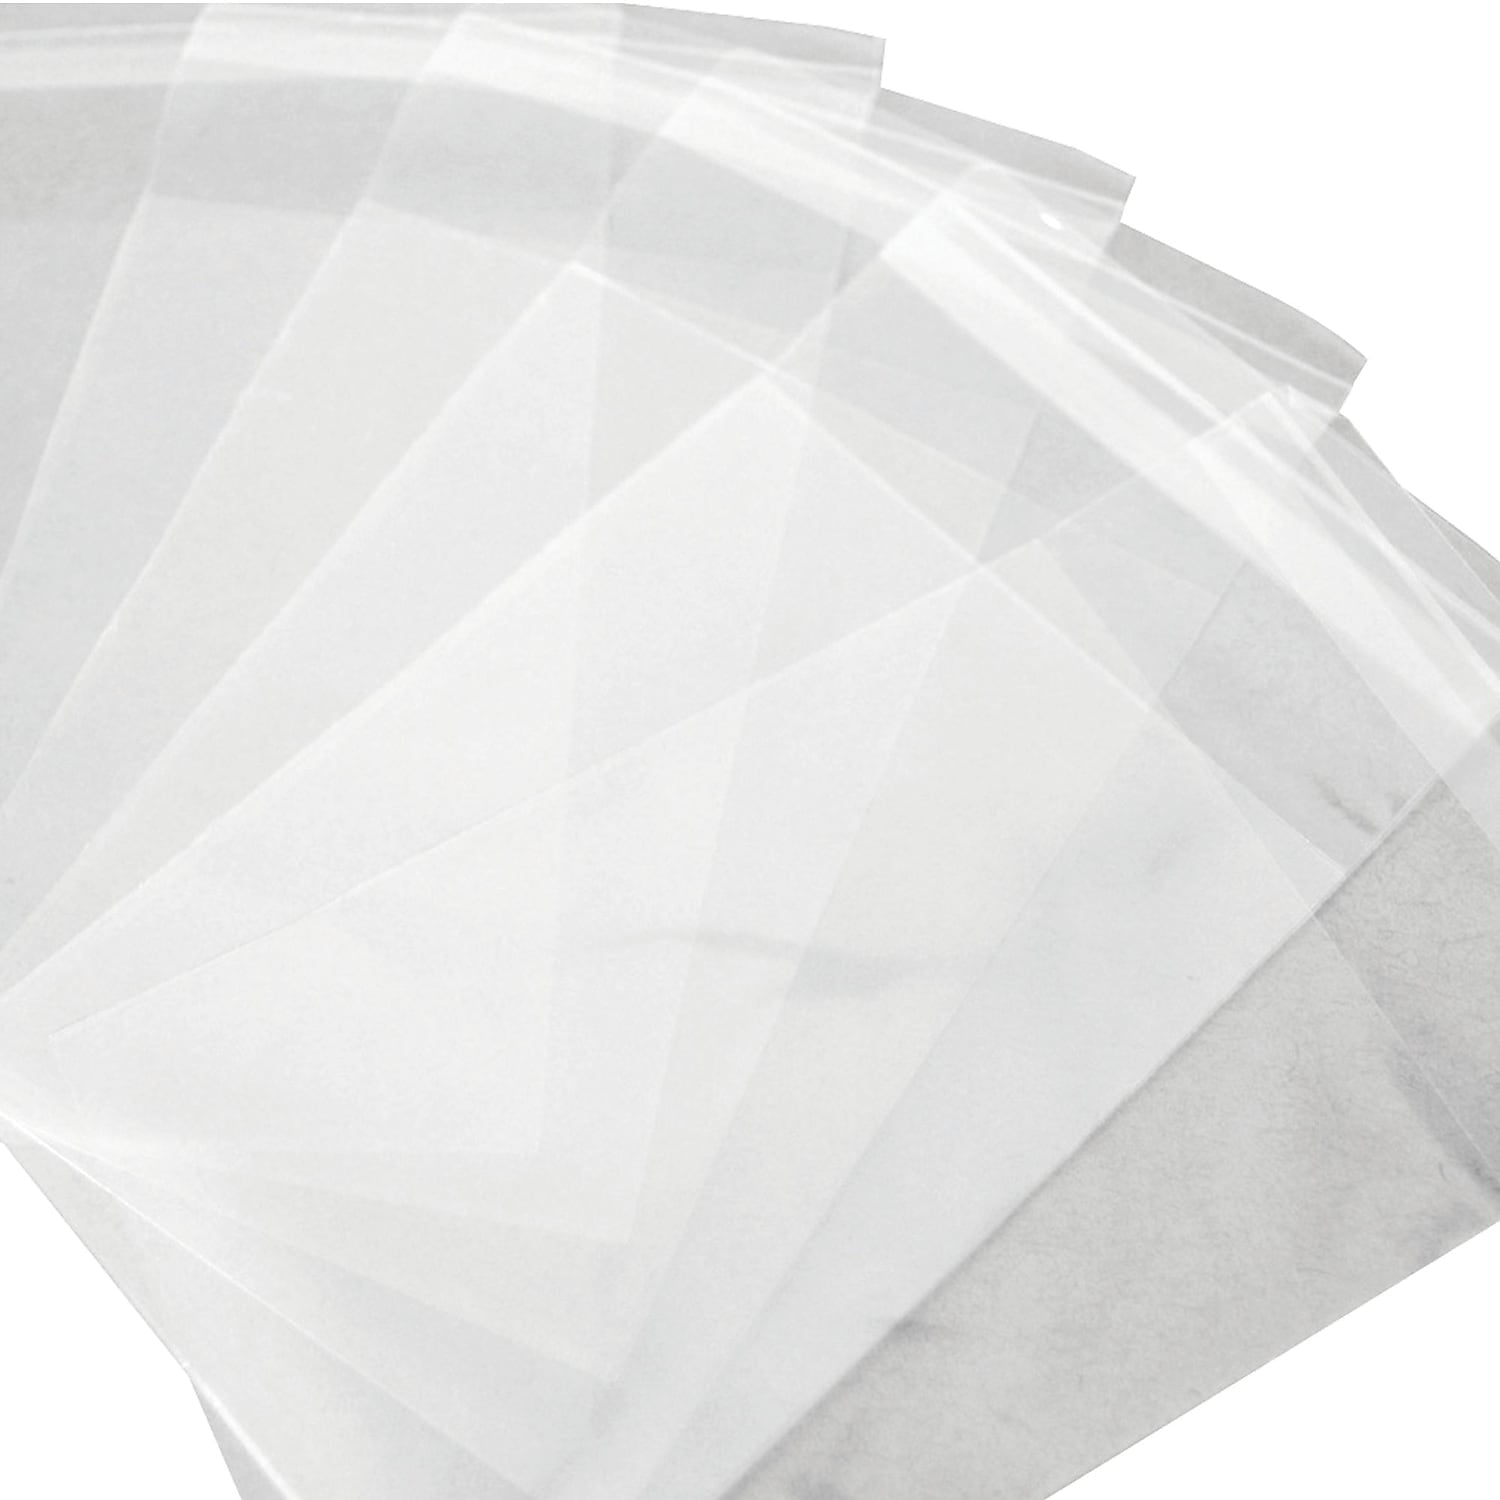 Pbr112 5 X 7 In. 1.5 Mil Resealable Polypropylene Bags Case, Pack Of 1000